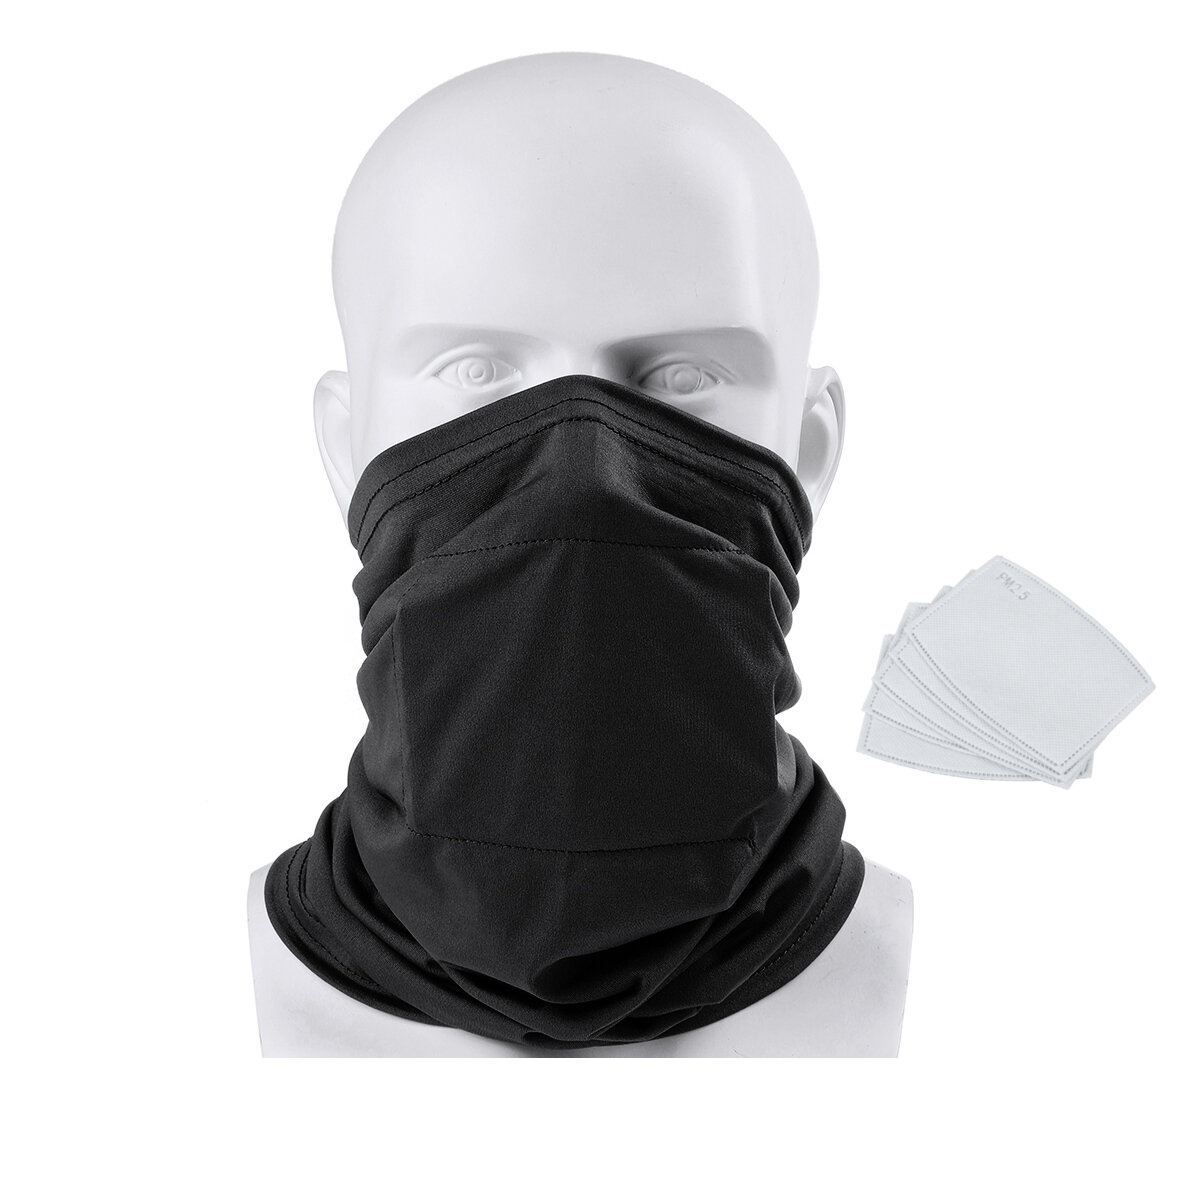 Adult Face Mask With 5pcs PM2.5 Filters Tube Scarf Bandana Head Multi-use Motorcycle Bike Riding Neck Gaiter Outdoor